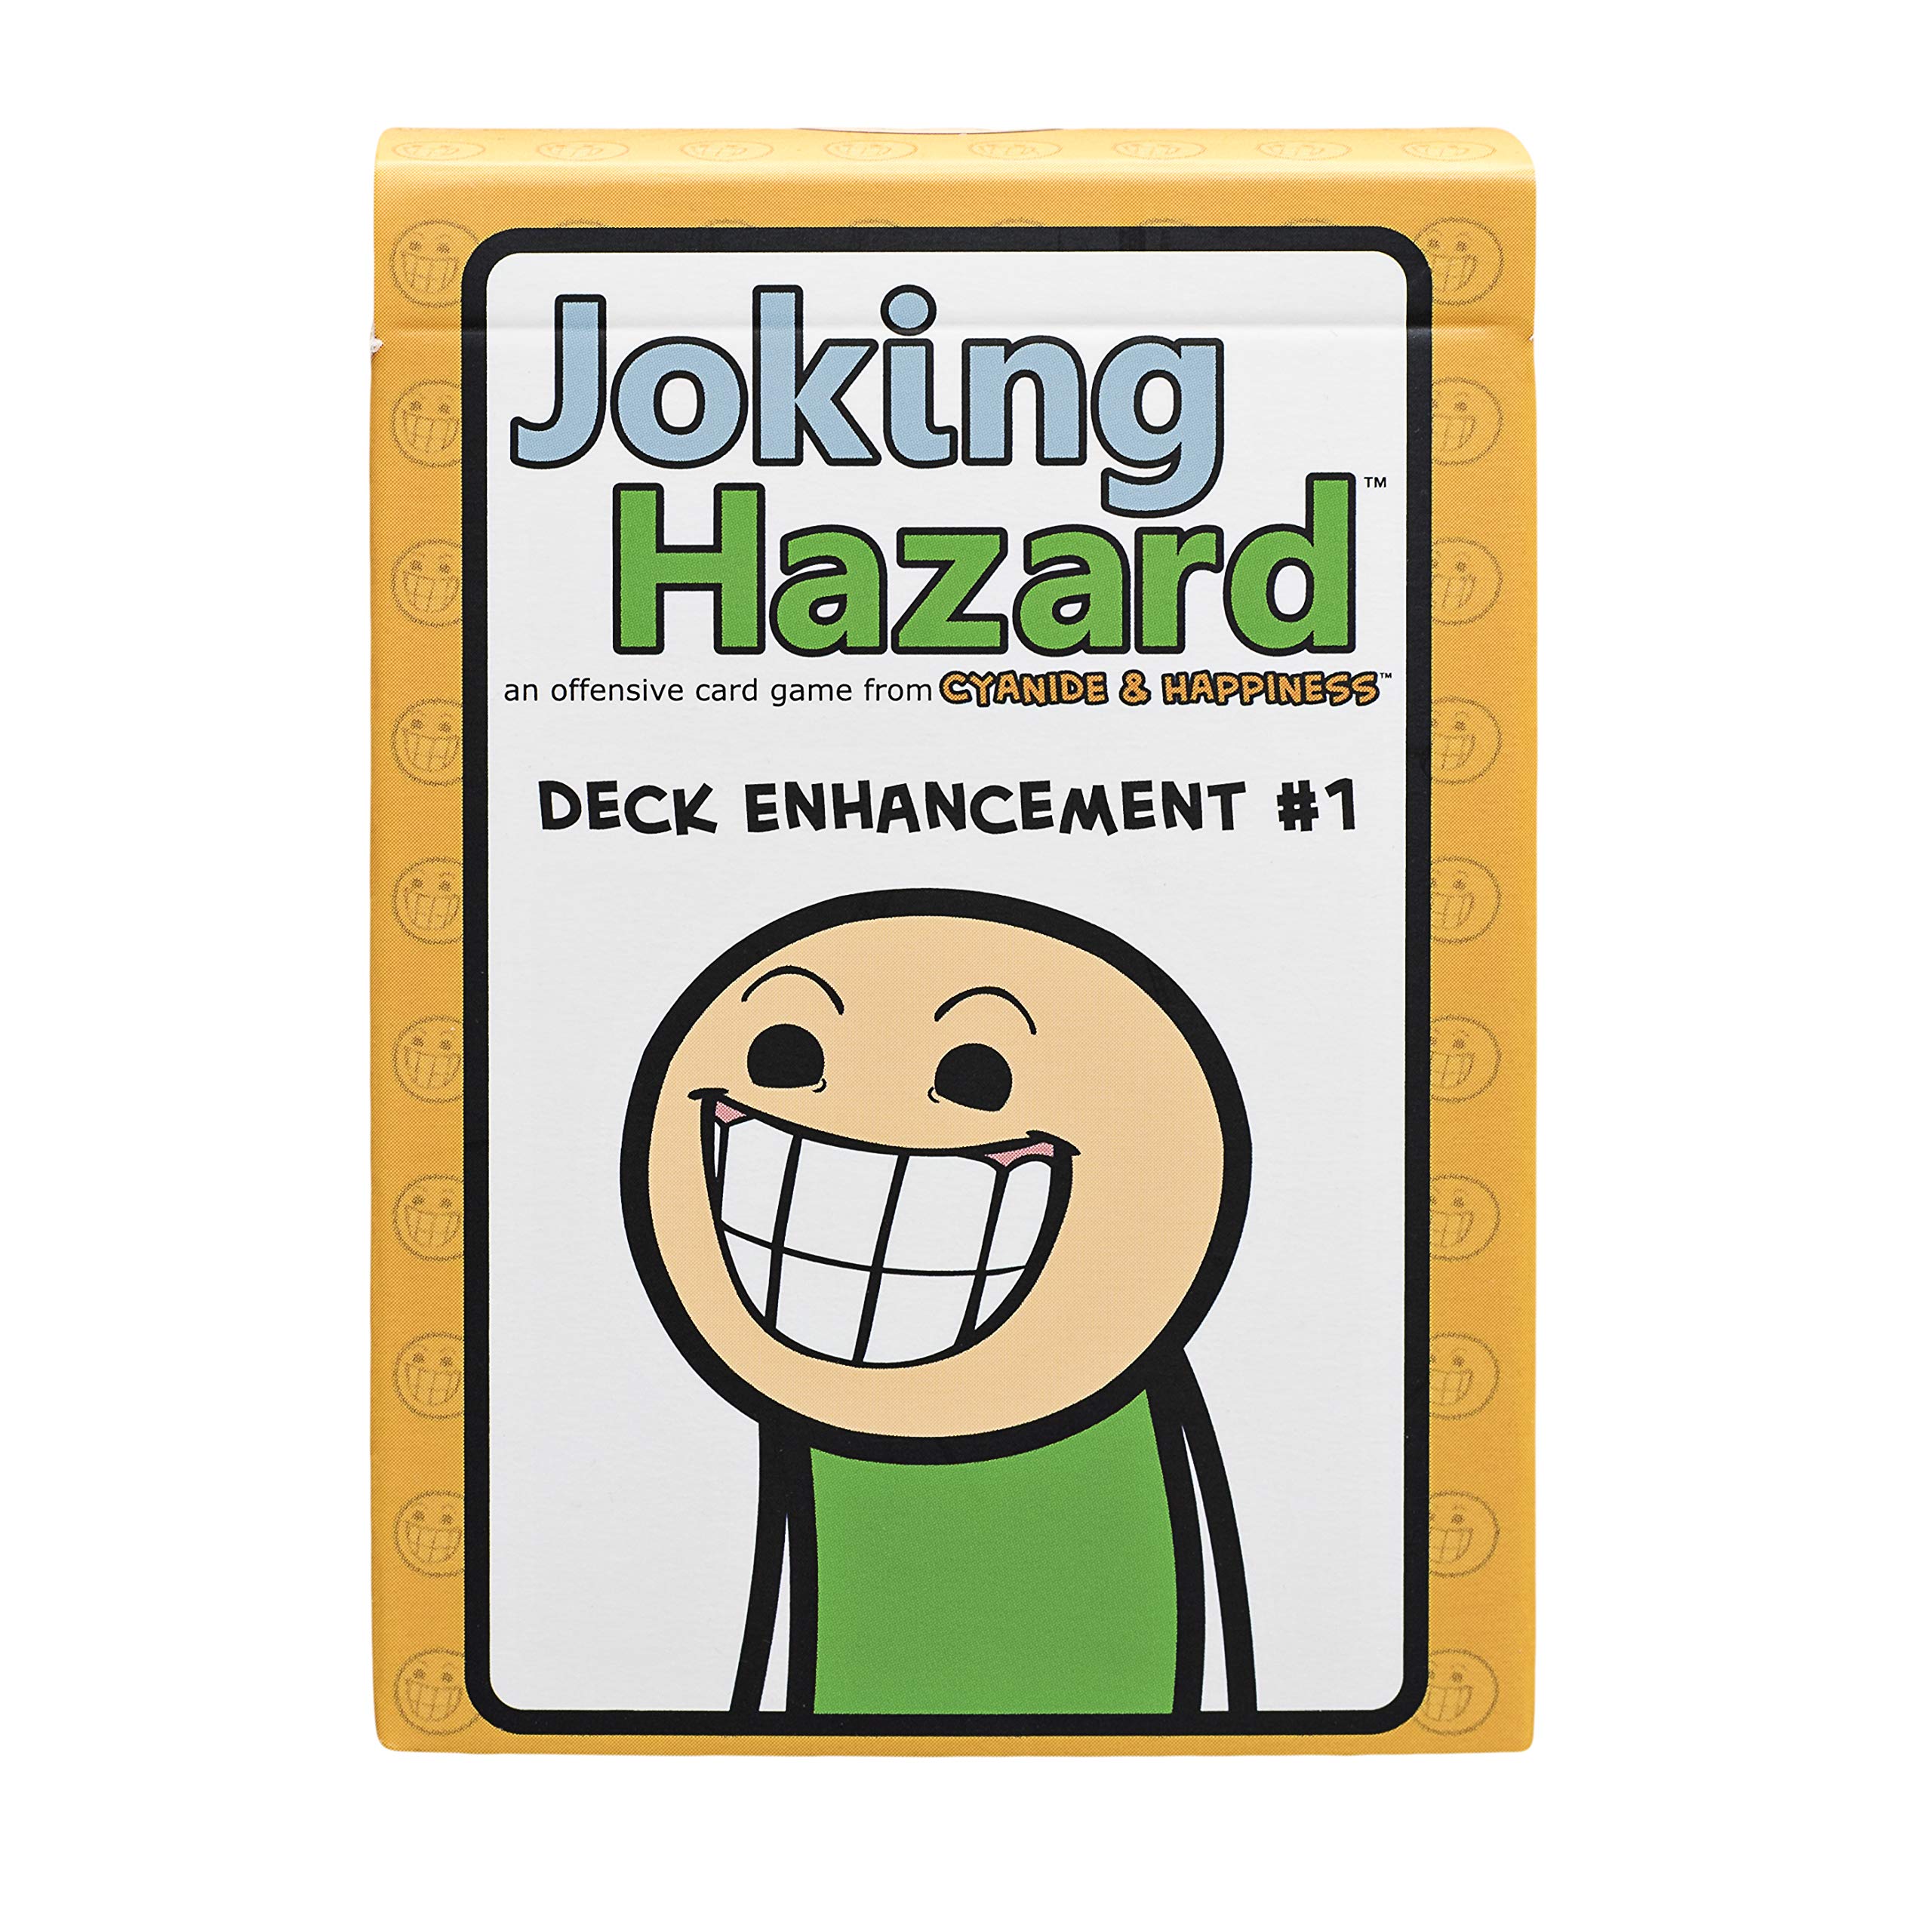 Deck Enhancement #1 - The first expansion of Joking Hazard Comic Building Card - Party Game by Cyanide and Happiness for 3-10 players , Orange